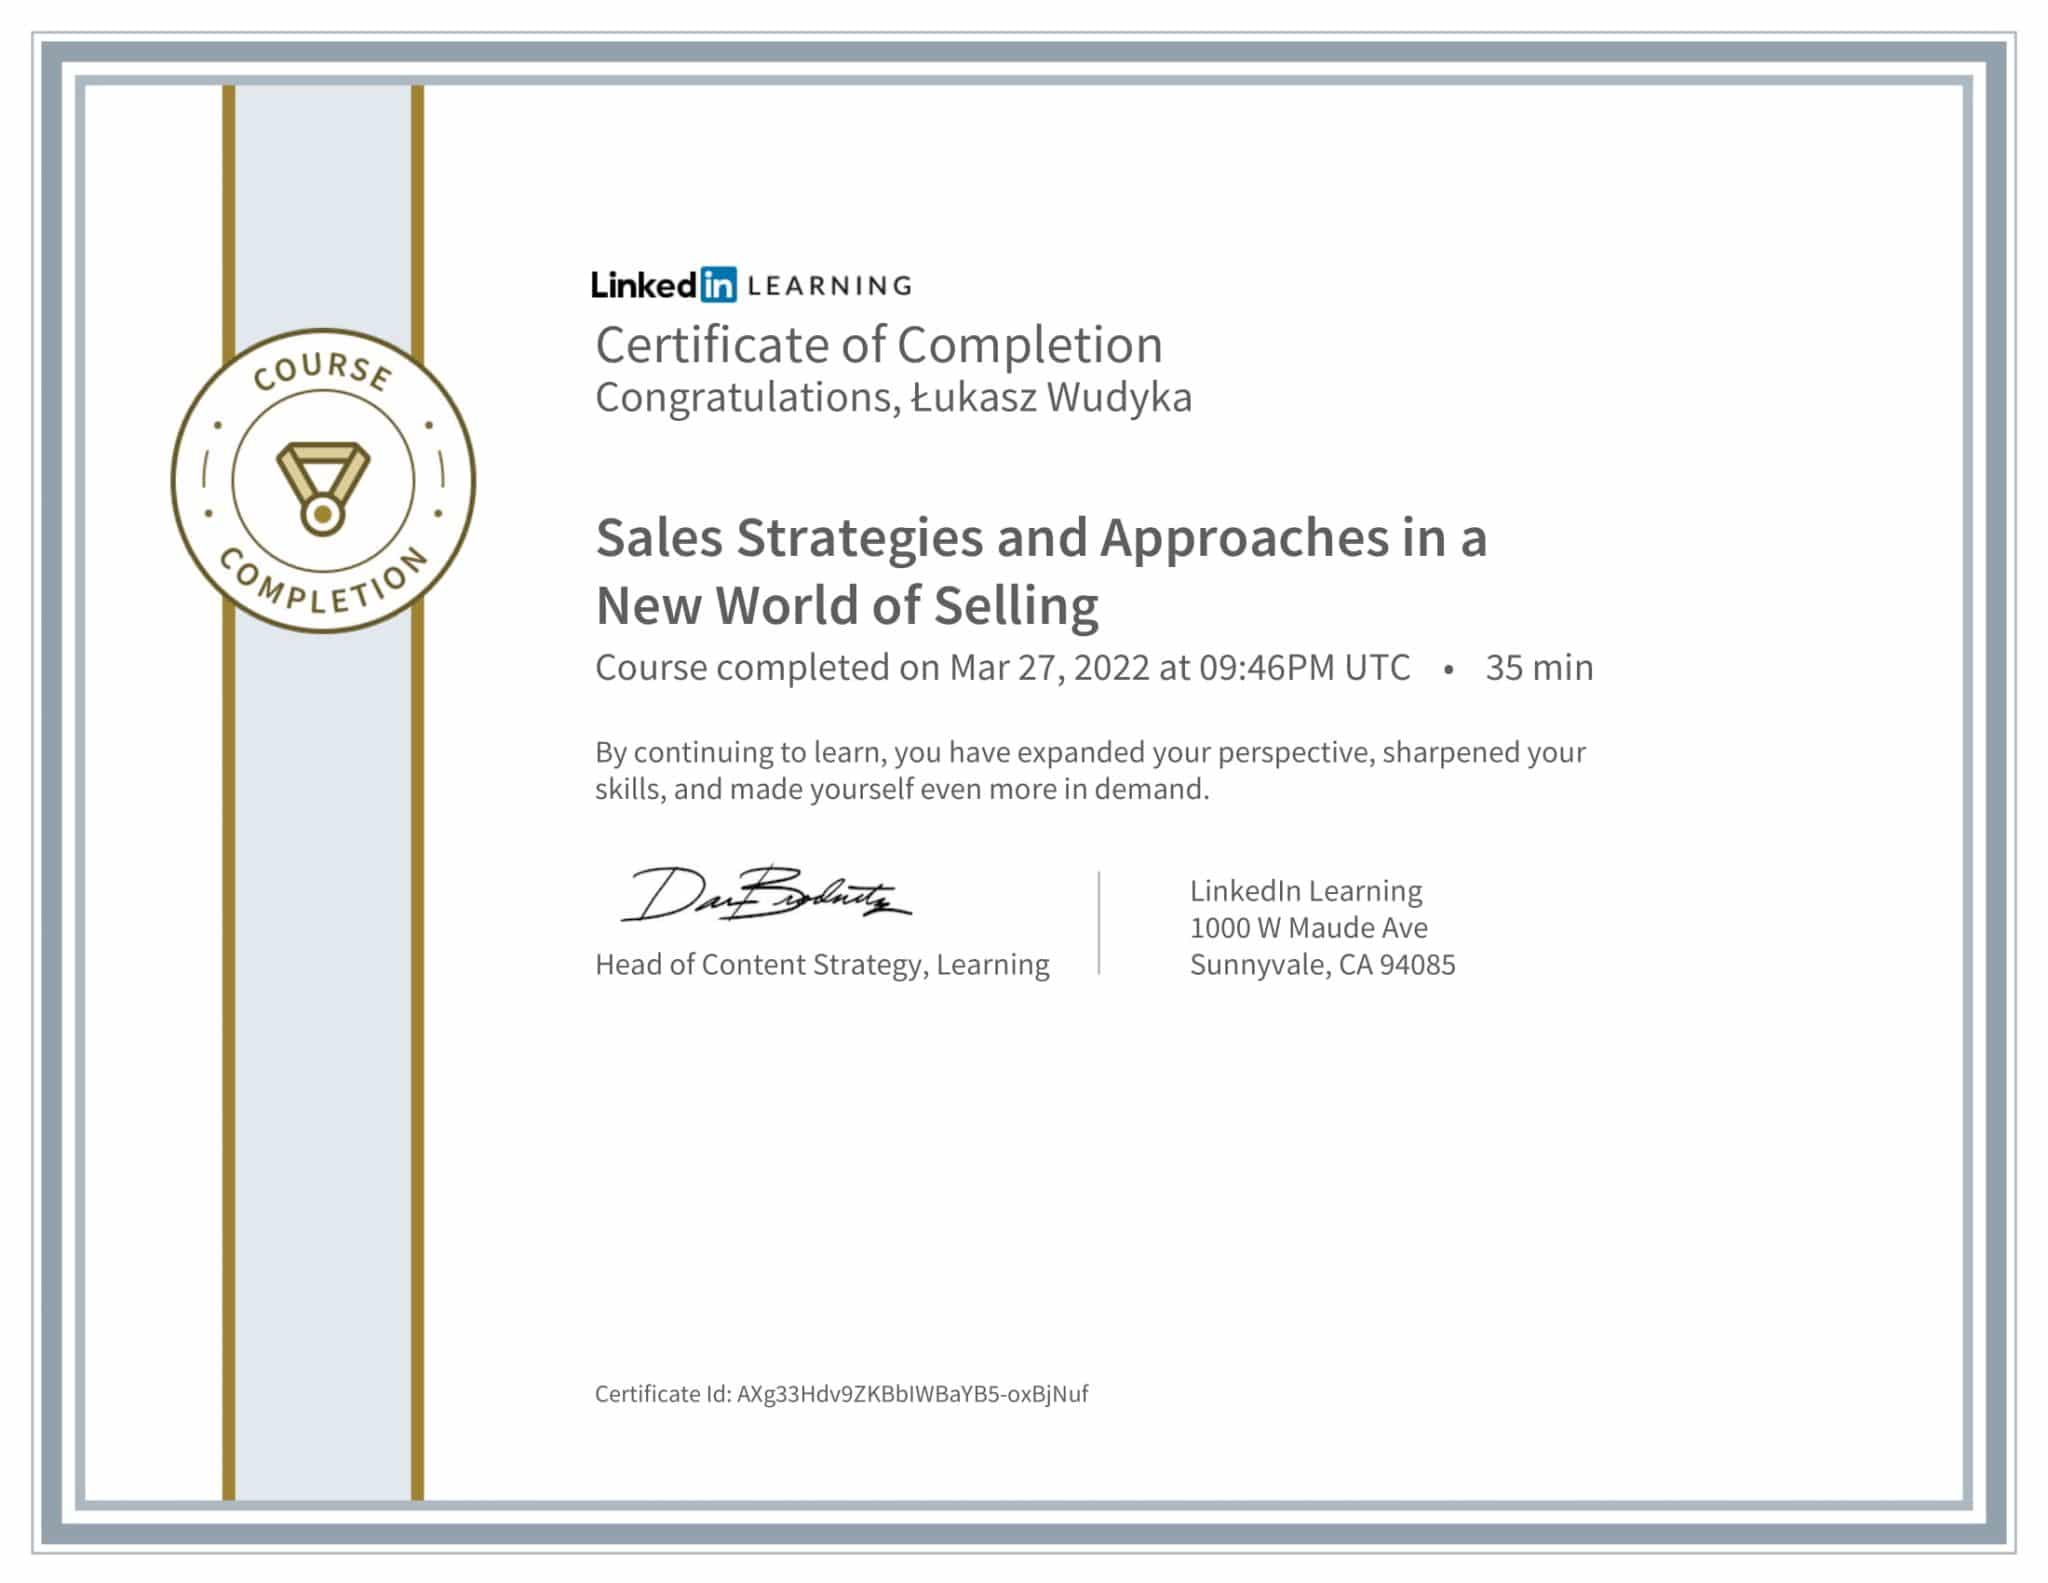 CertificateOfCompletion_Sales Strategies and Approaches in a New World of Selling-1